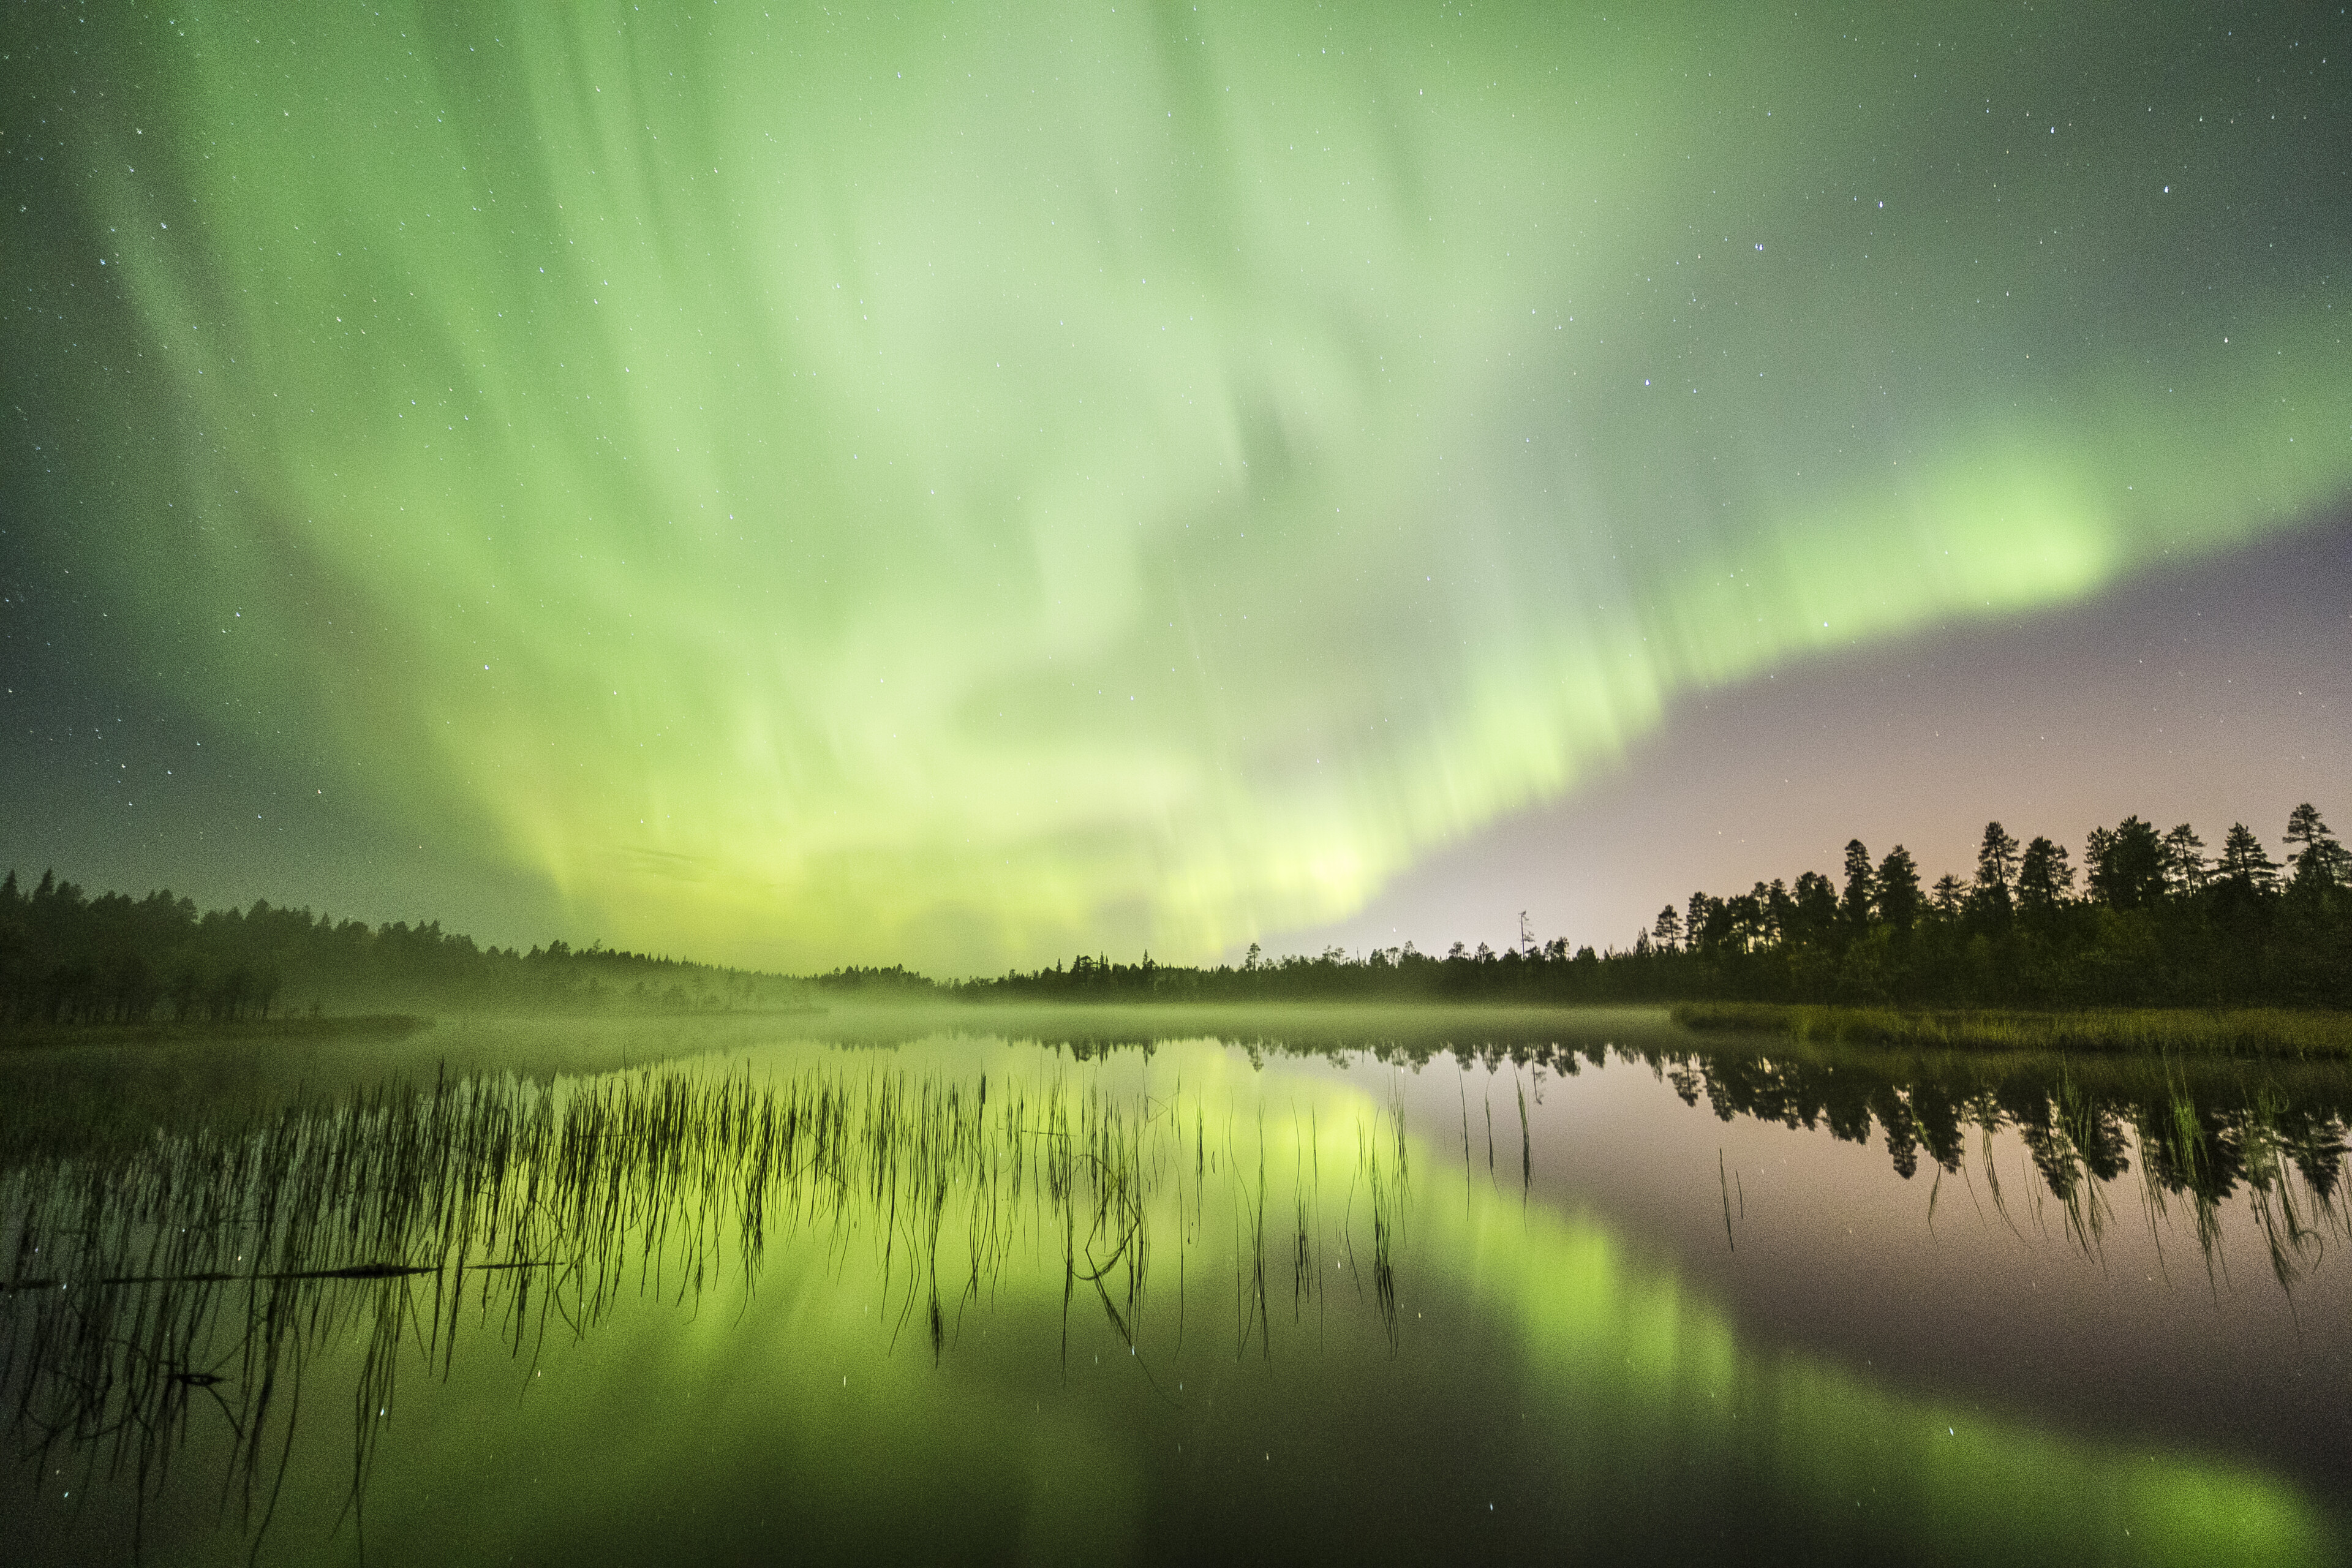 Northern Lights dancing in the sky in Rovaniemi, Lapland, Finland.